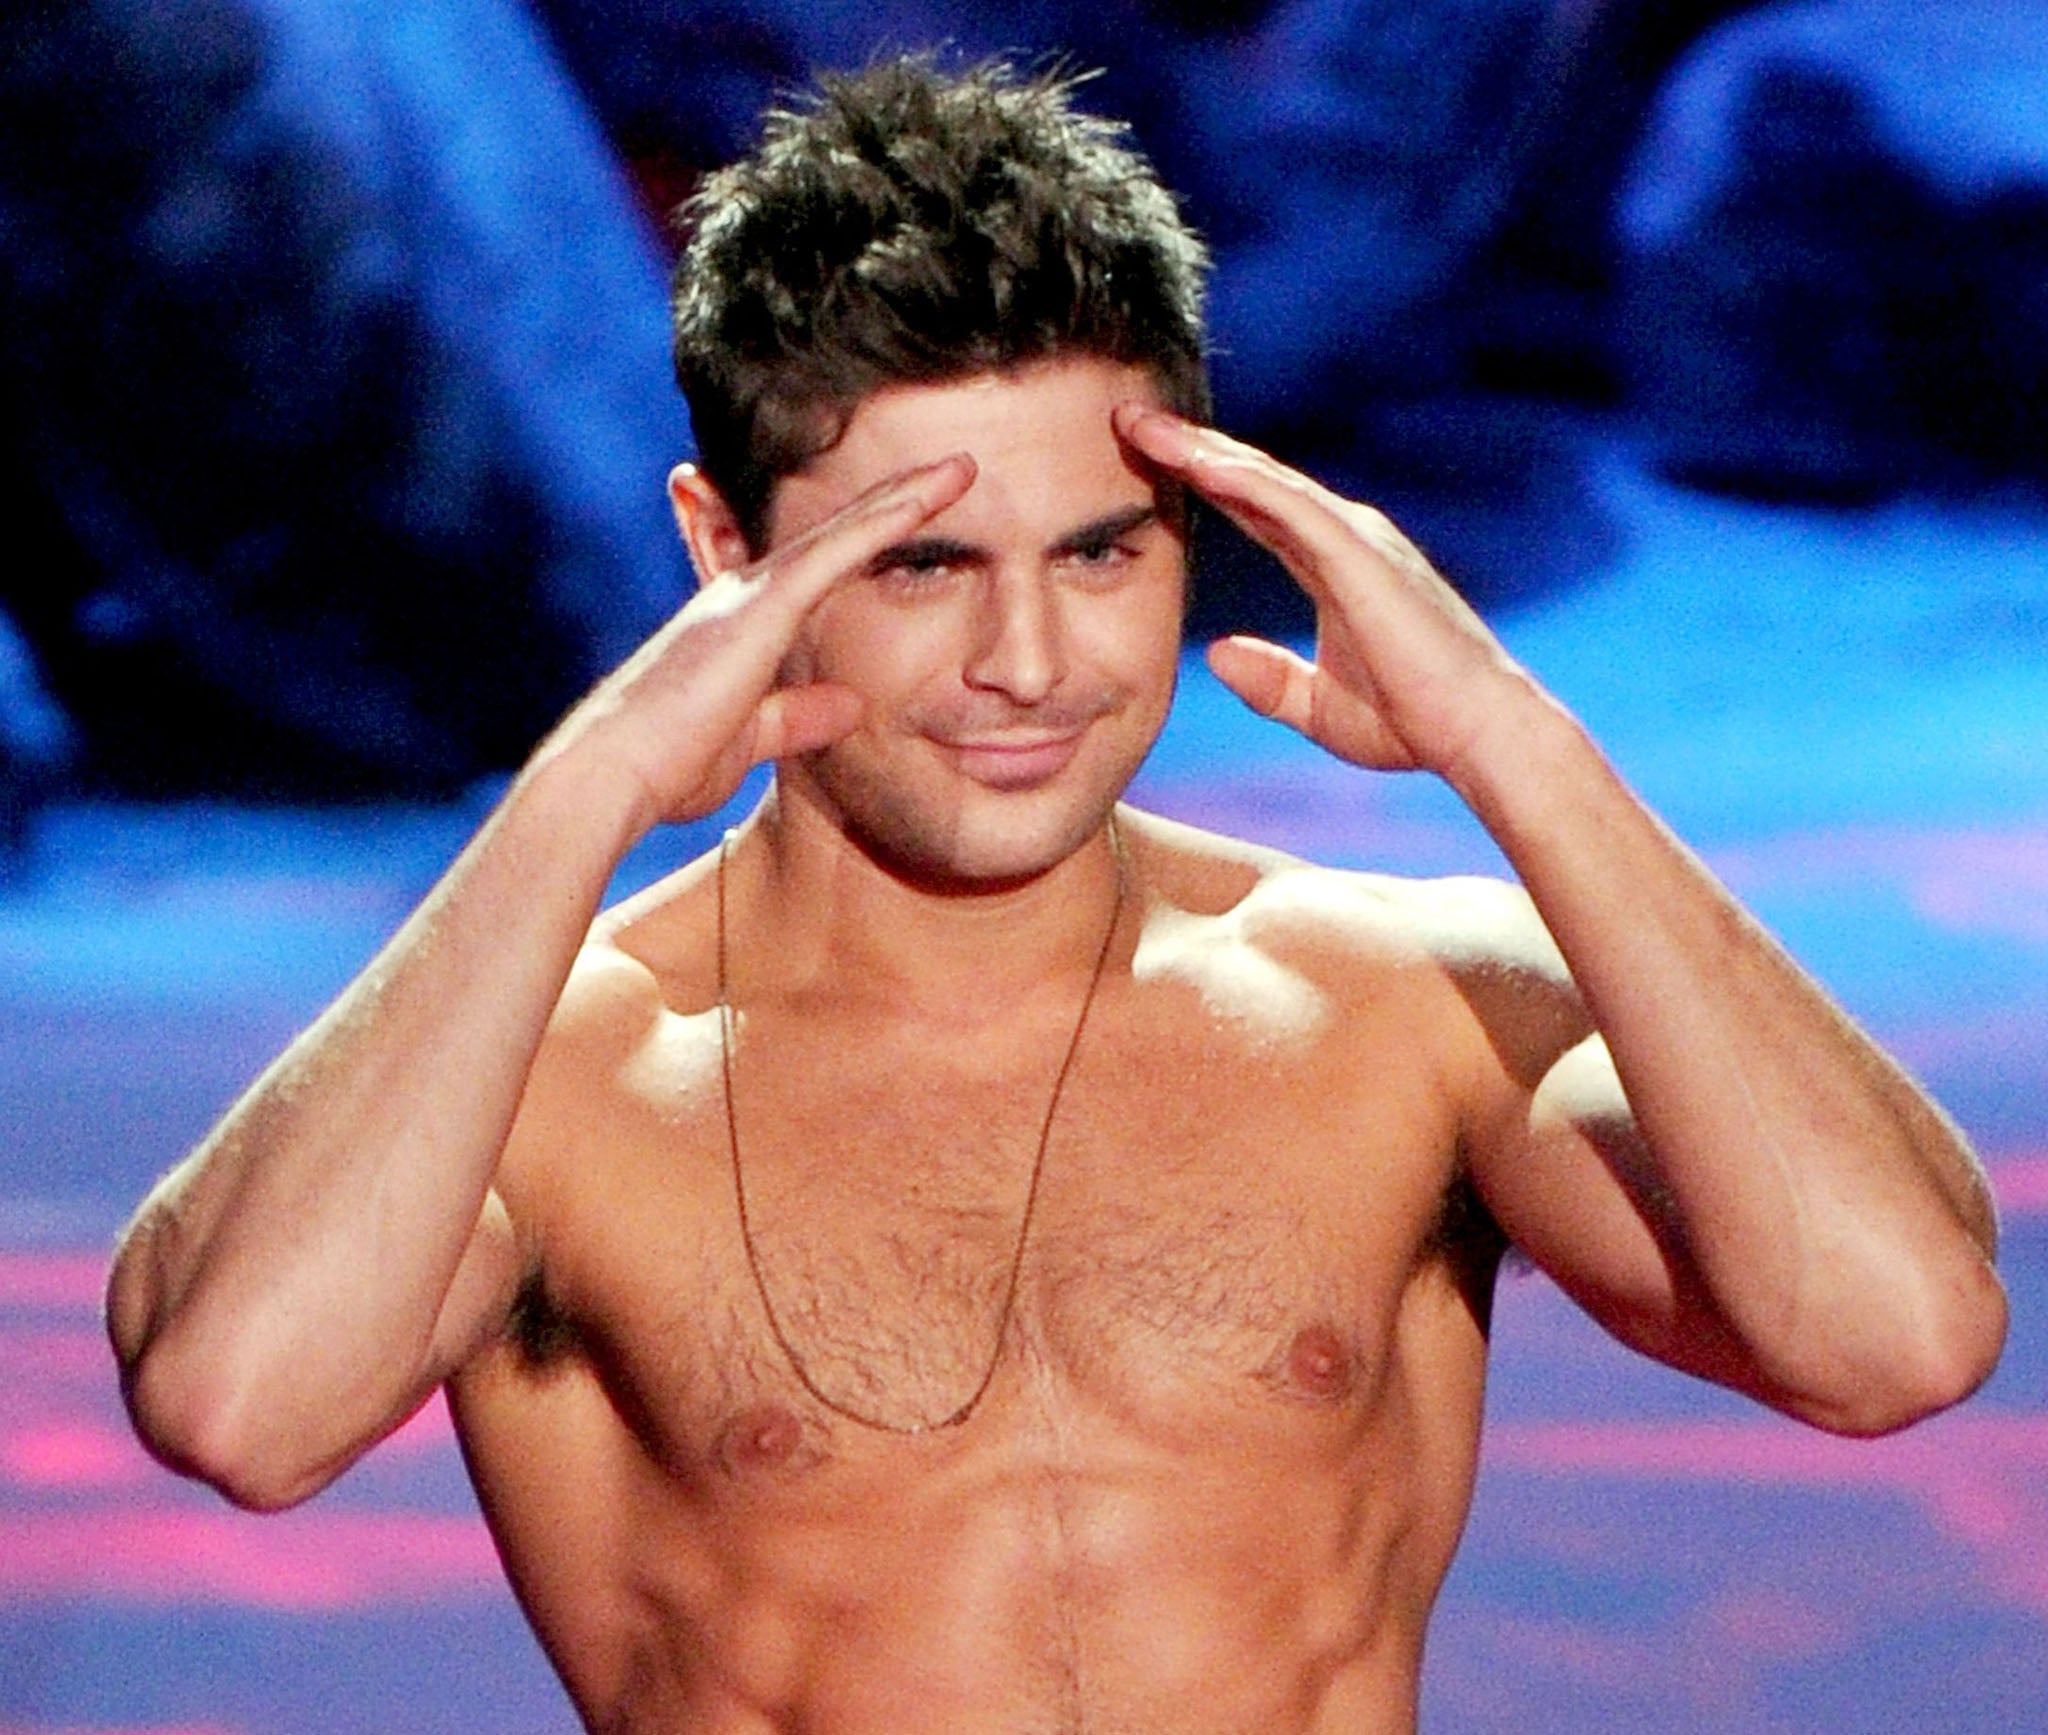 Zac Efron topless The stars shirtless moment sparks accusations of male objectification and sexism at the MTV Movie Awards 2014 The Independent The Independent pic